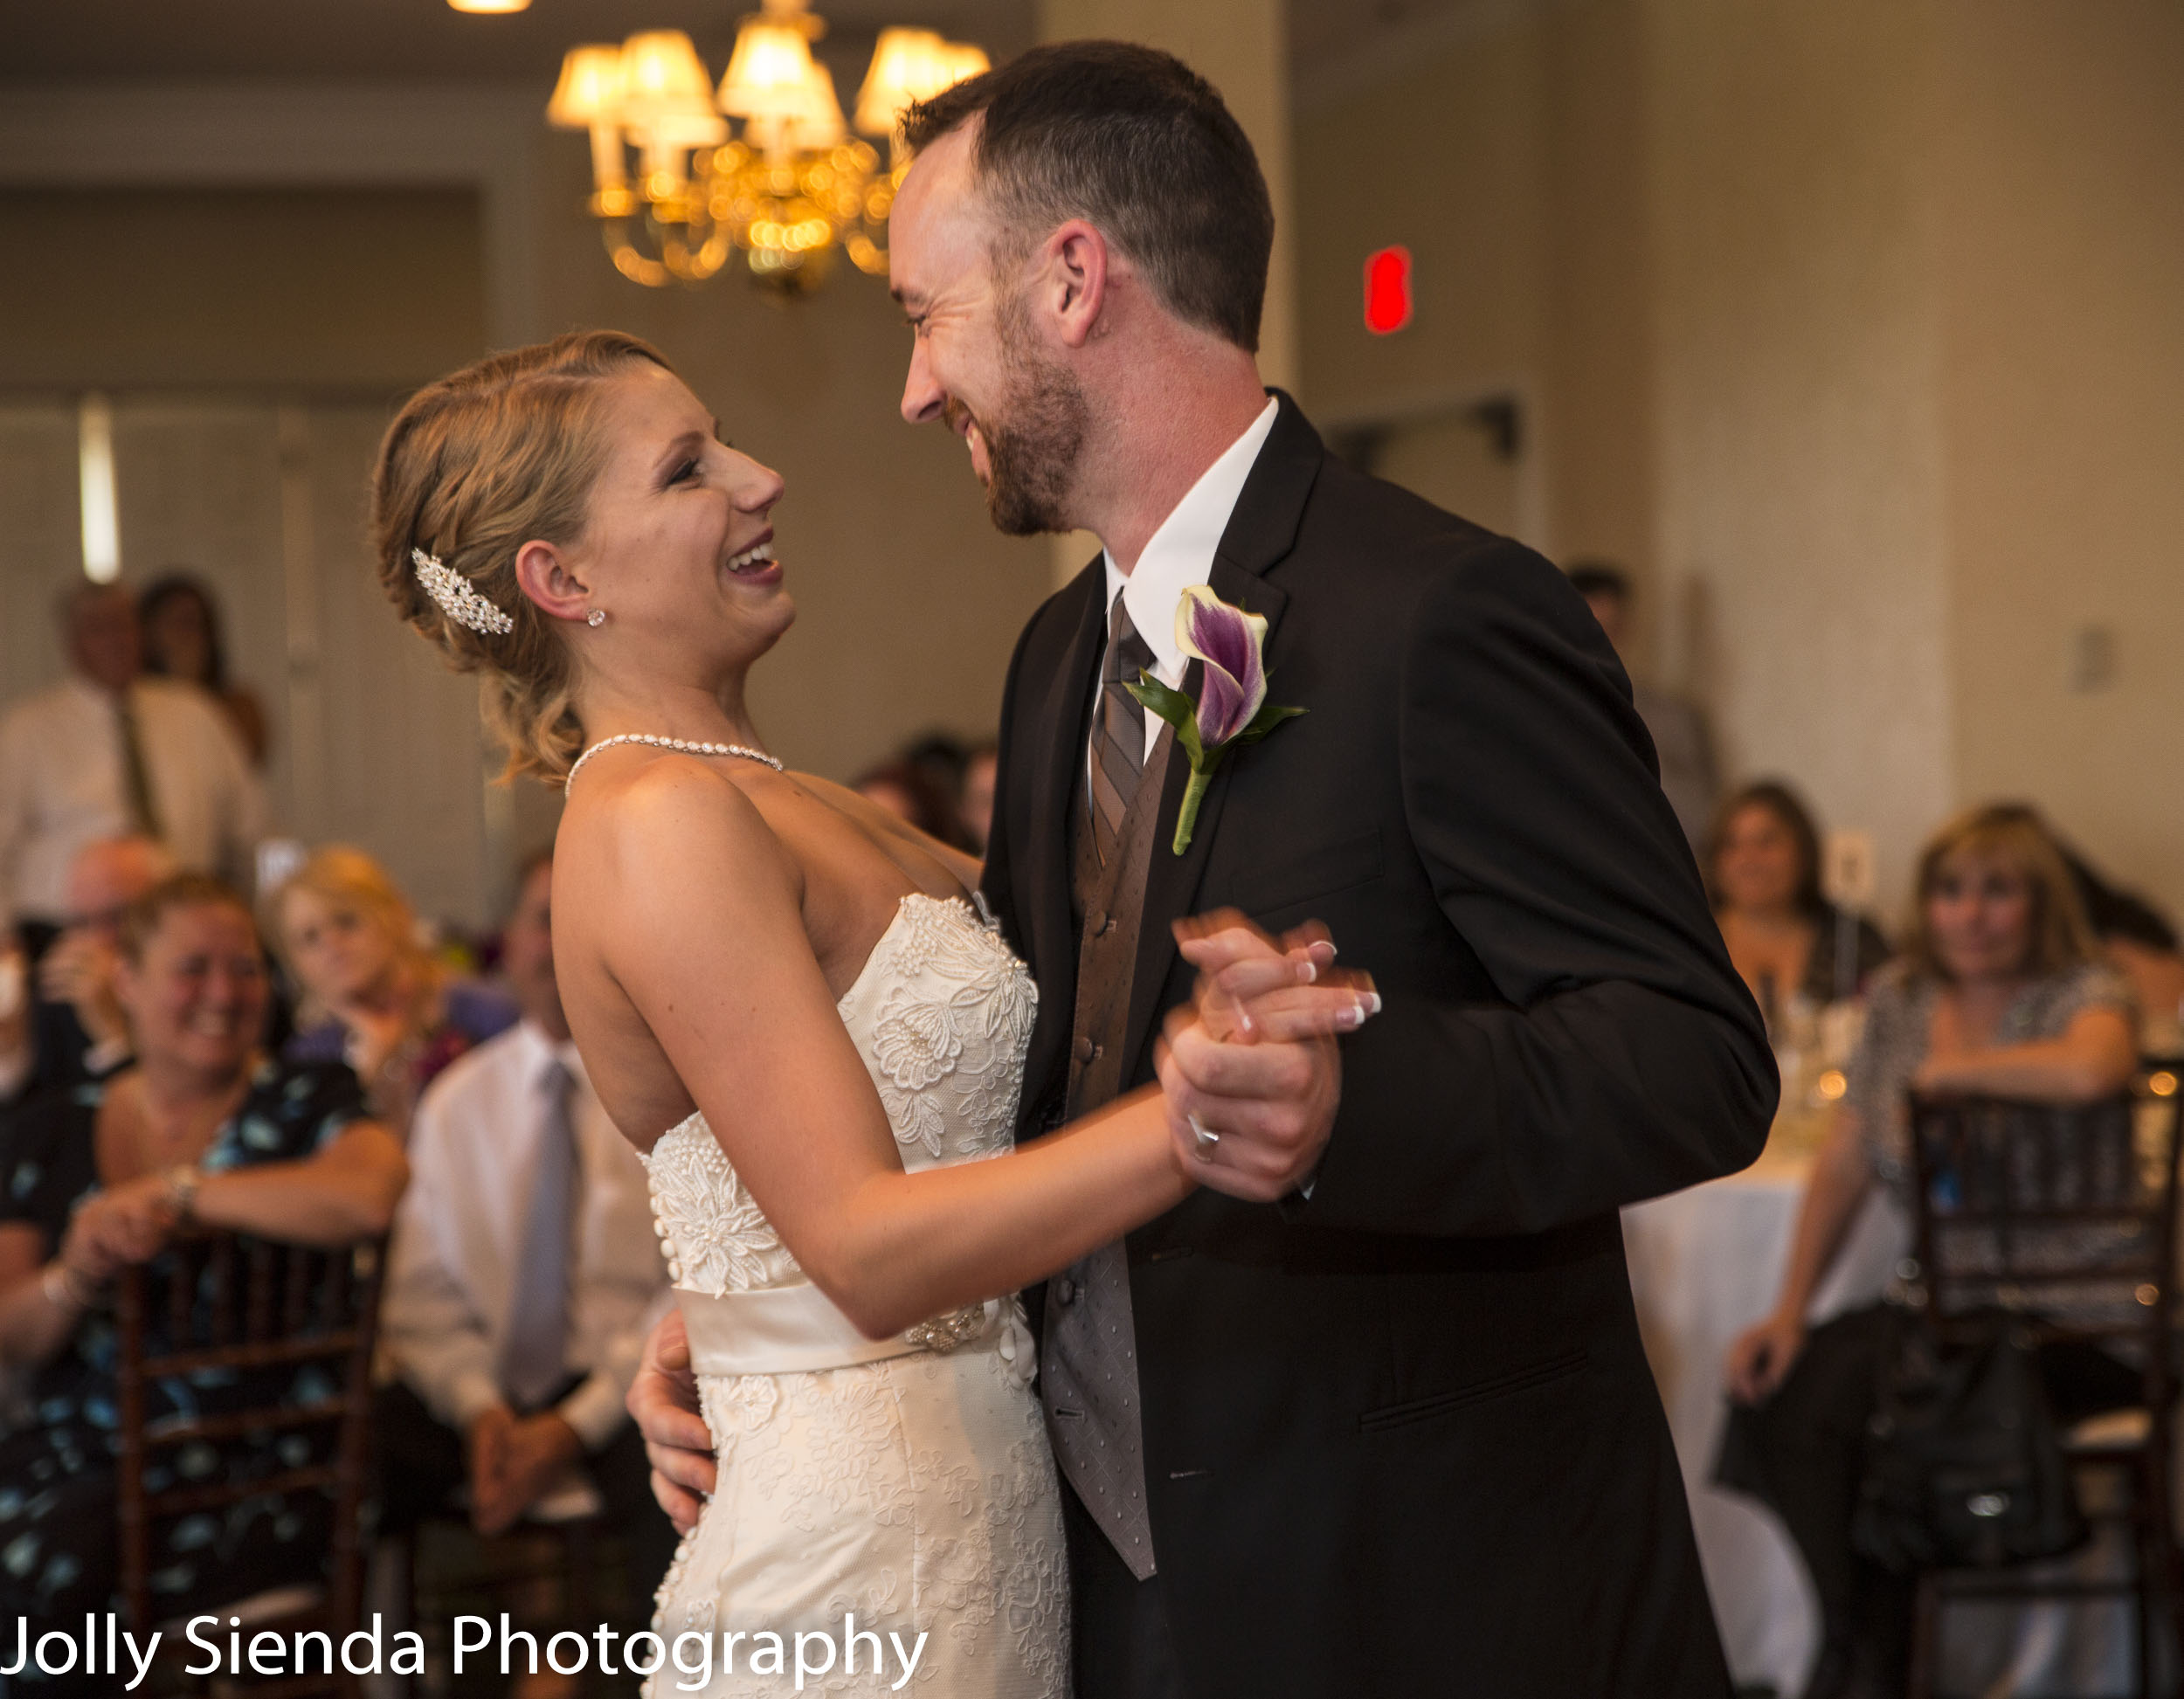 Portrait of a bride and groom dancing at their wedding reception